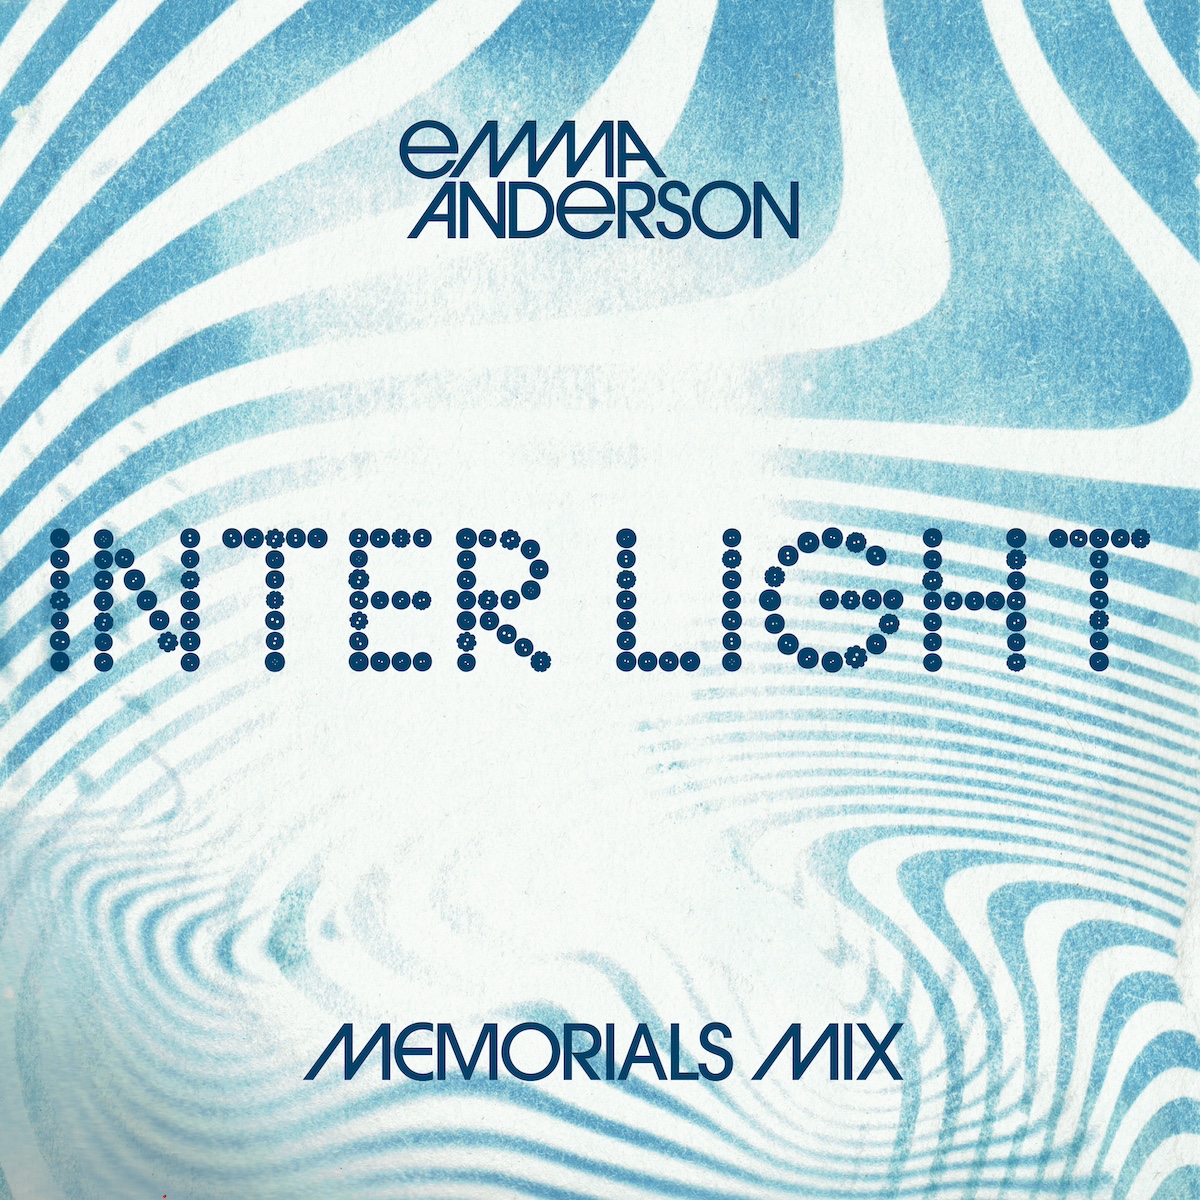 ICYMI there’s a new rearrangement of @evjanderson’s ‘Inter Light’ by @memorials_music out now on all digital platforms. Listen, watch, buy etc here: linktr.ee/emmaandersonmu… 📸 by Jeff Pitcher and artwork by Stuart Jones 😍